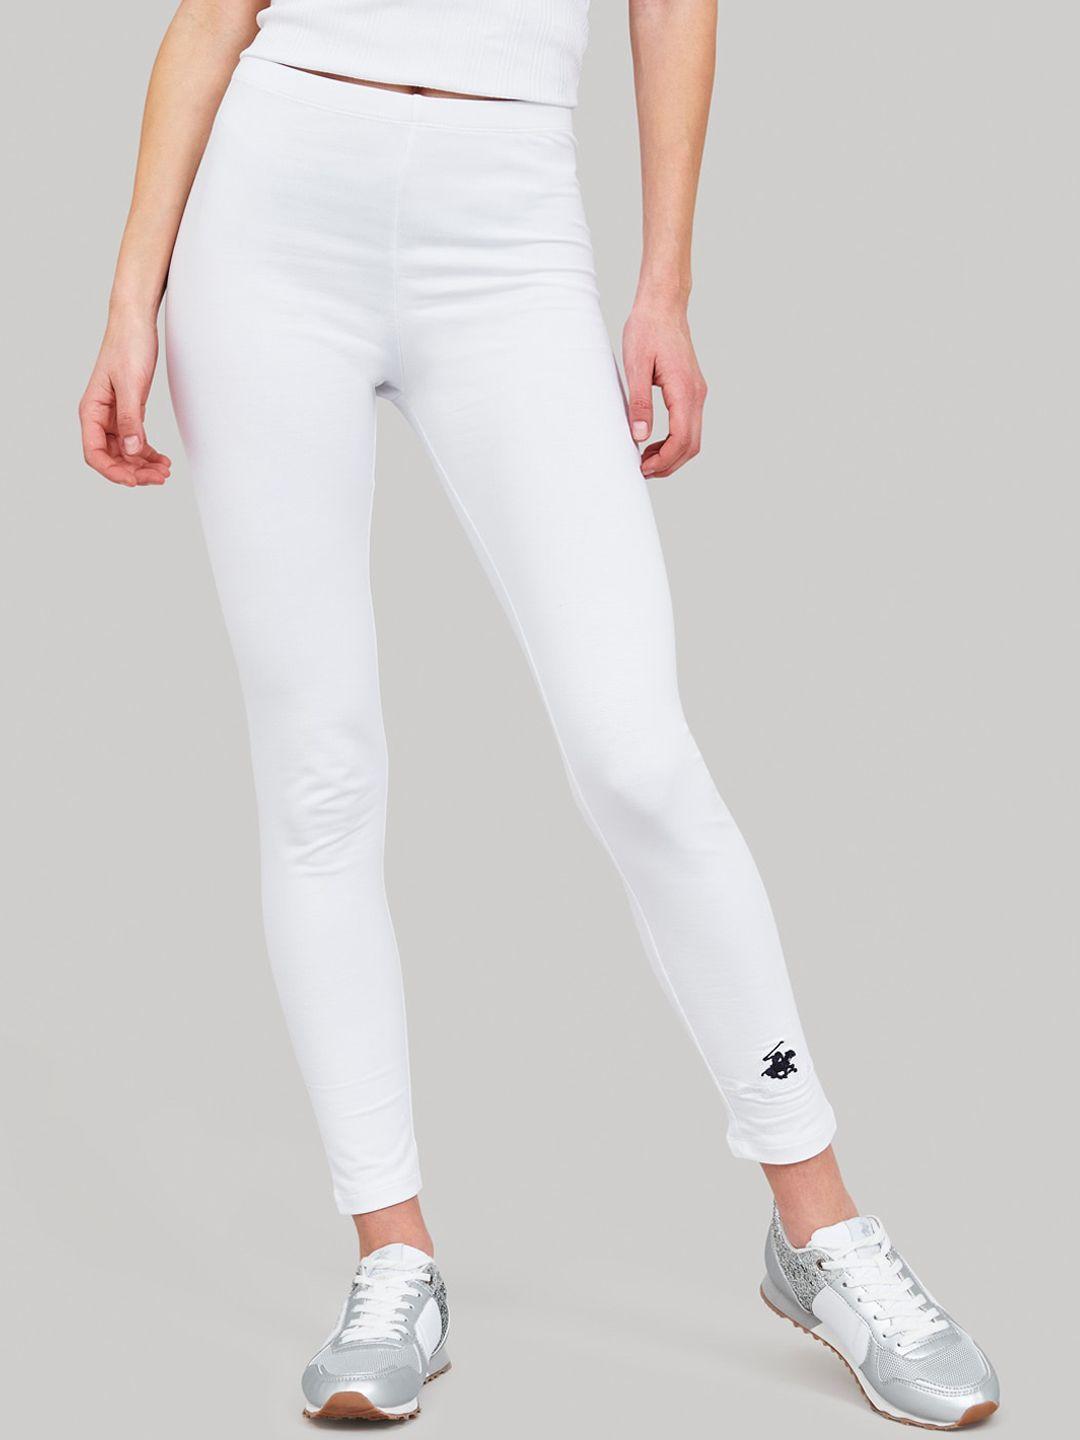 beverly hills polo club women white solid track pants